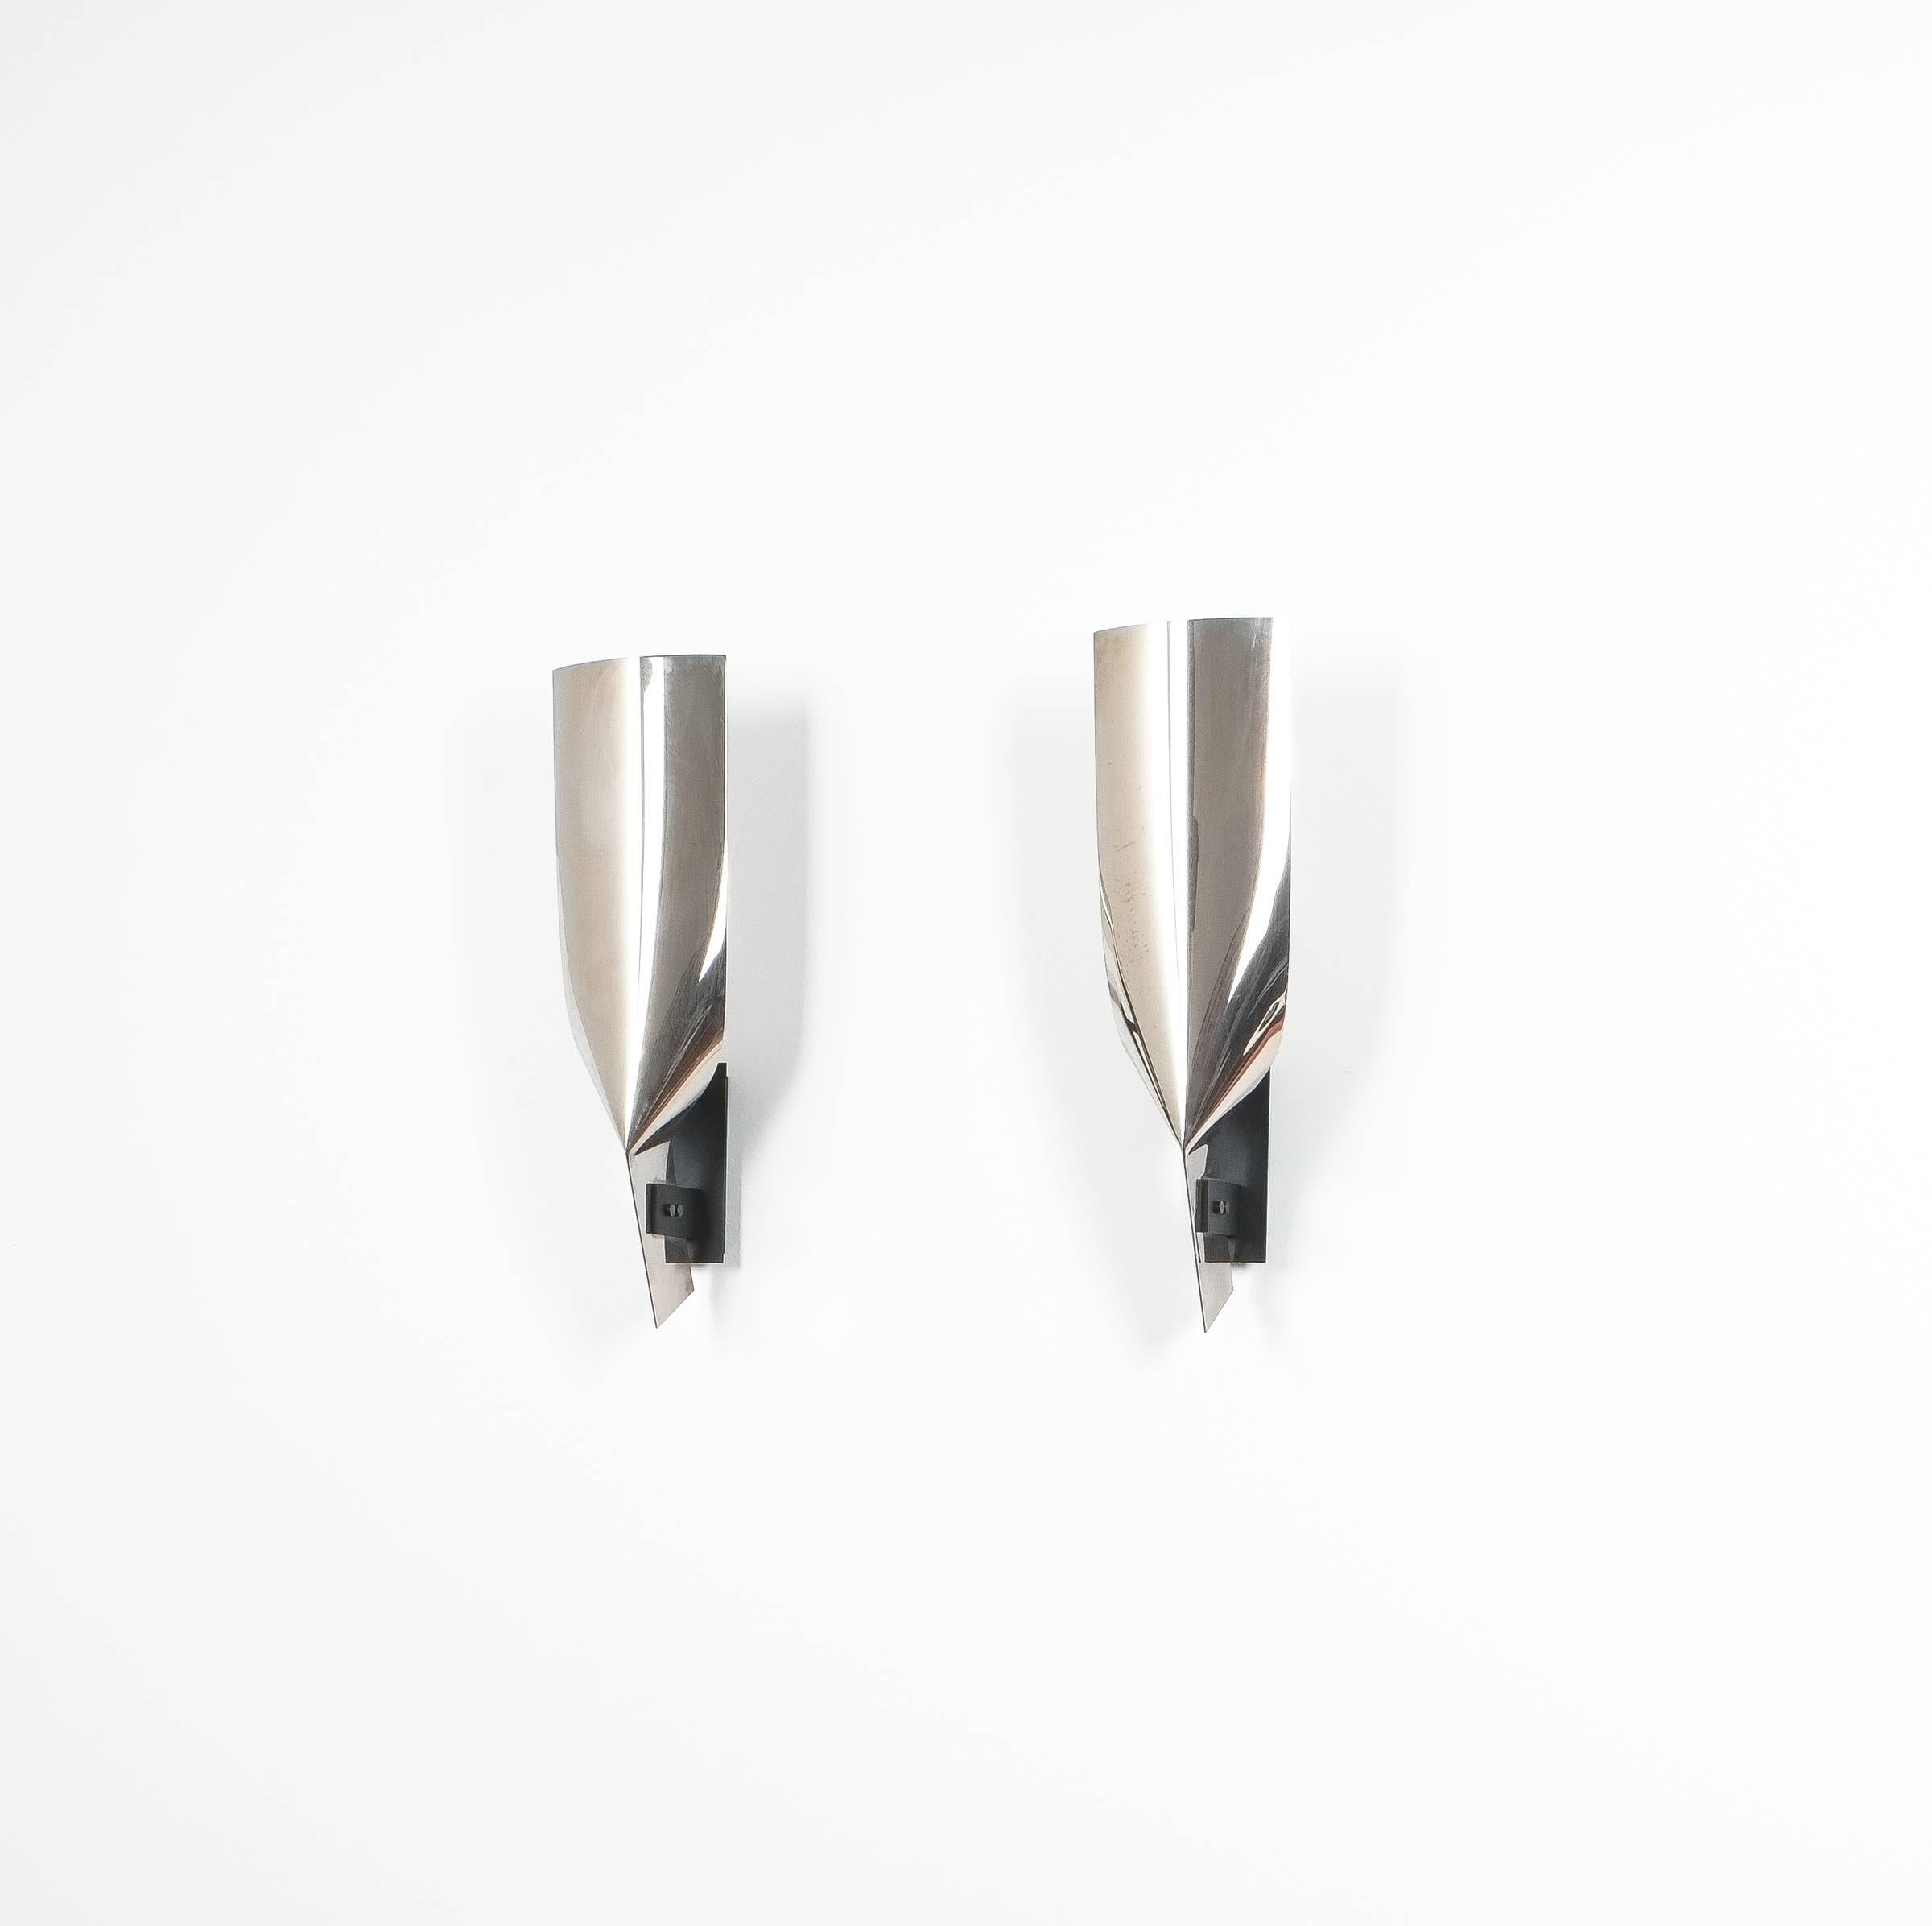 Late 20th Century Polished Artisan Stainless Steel Wall Lamps Folded Large Sconces, France, 1980